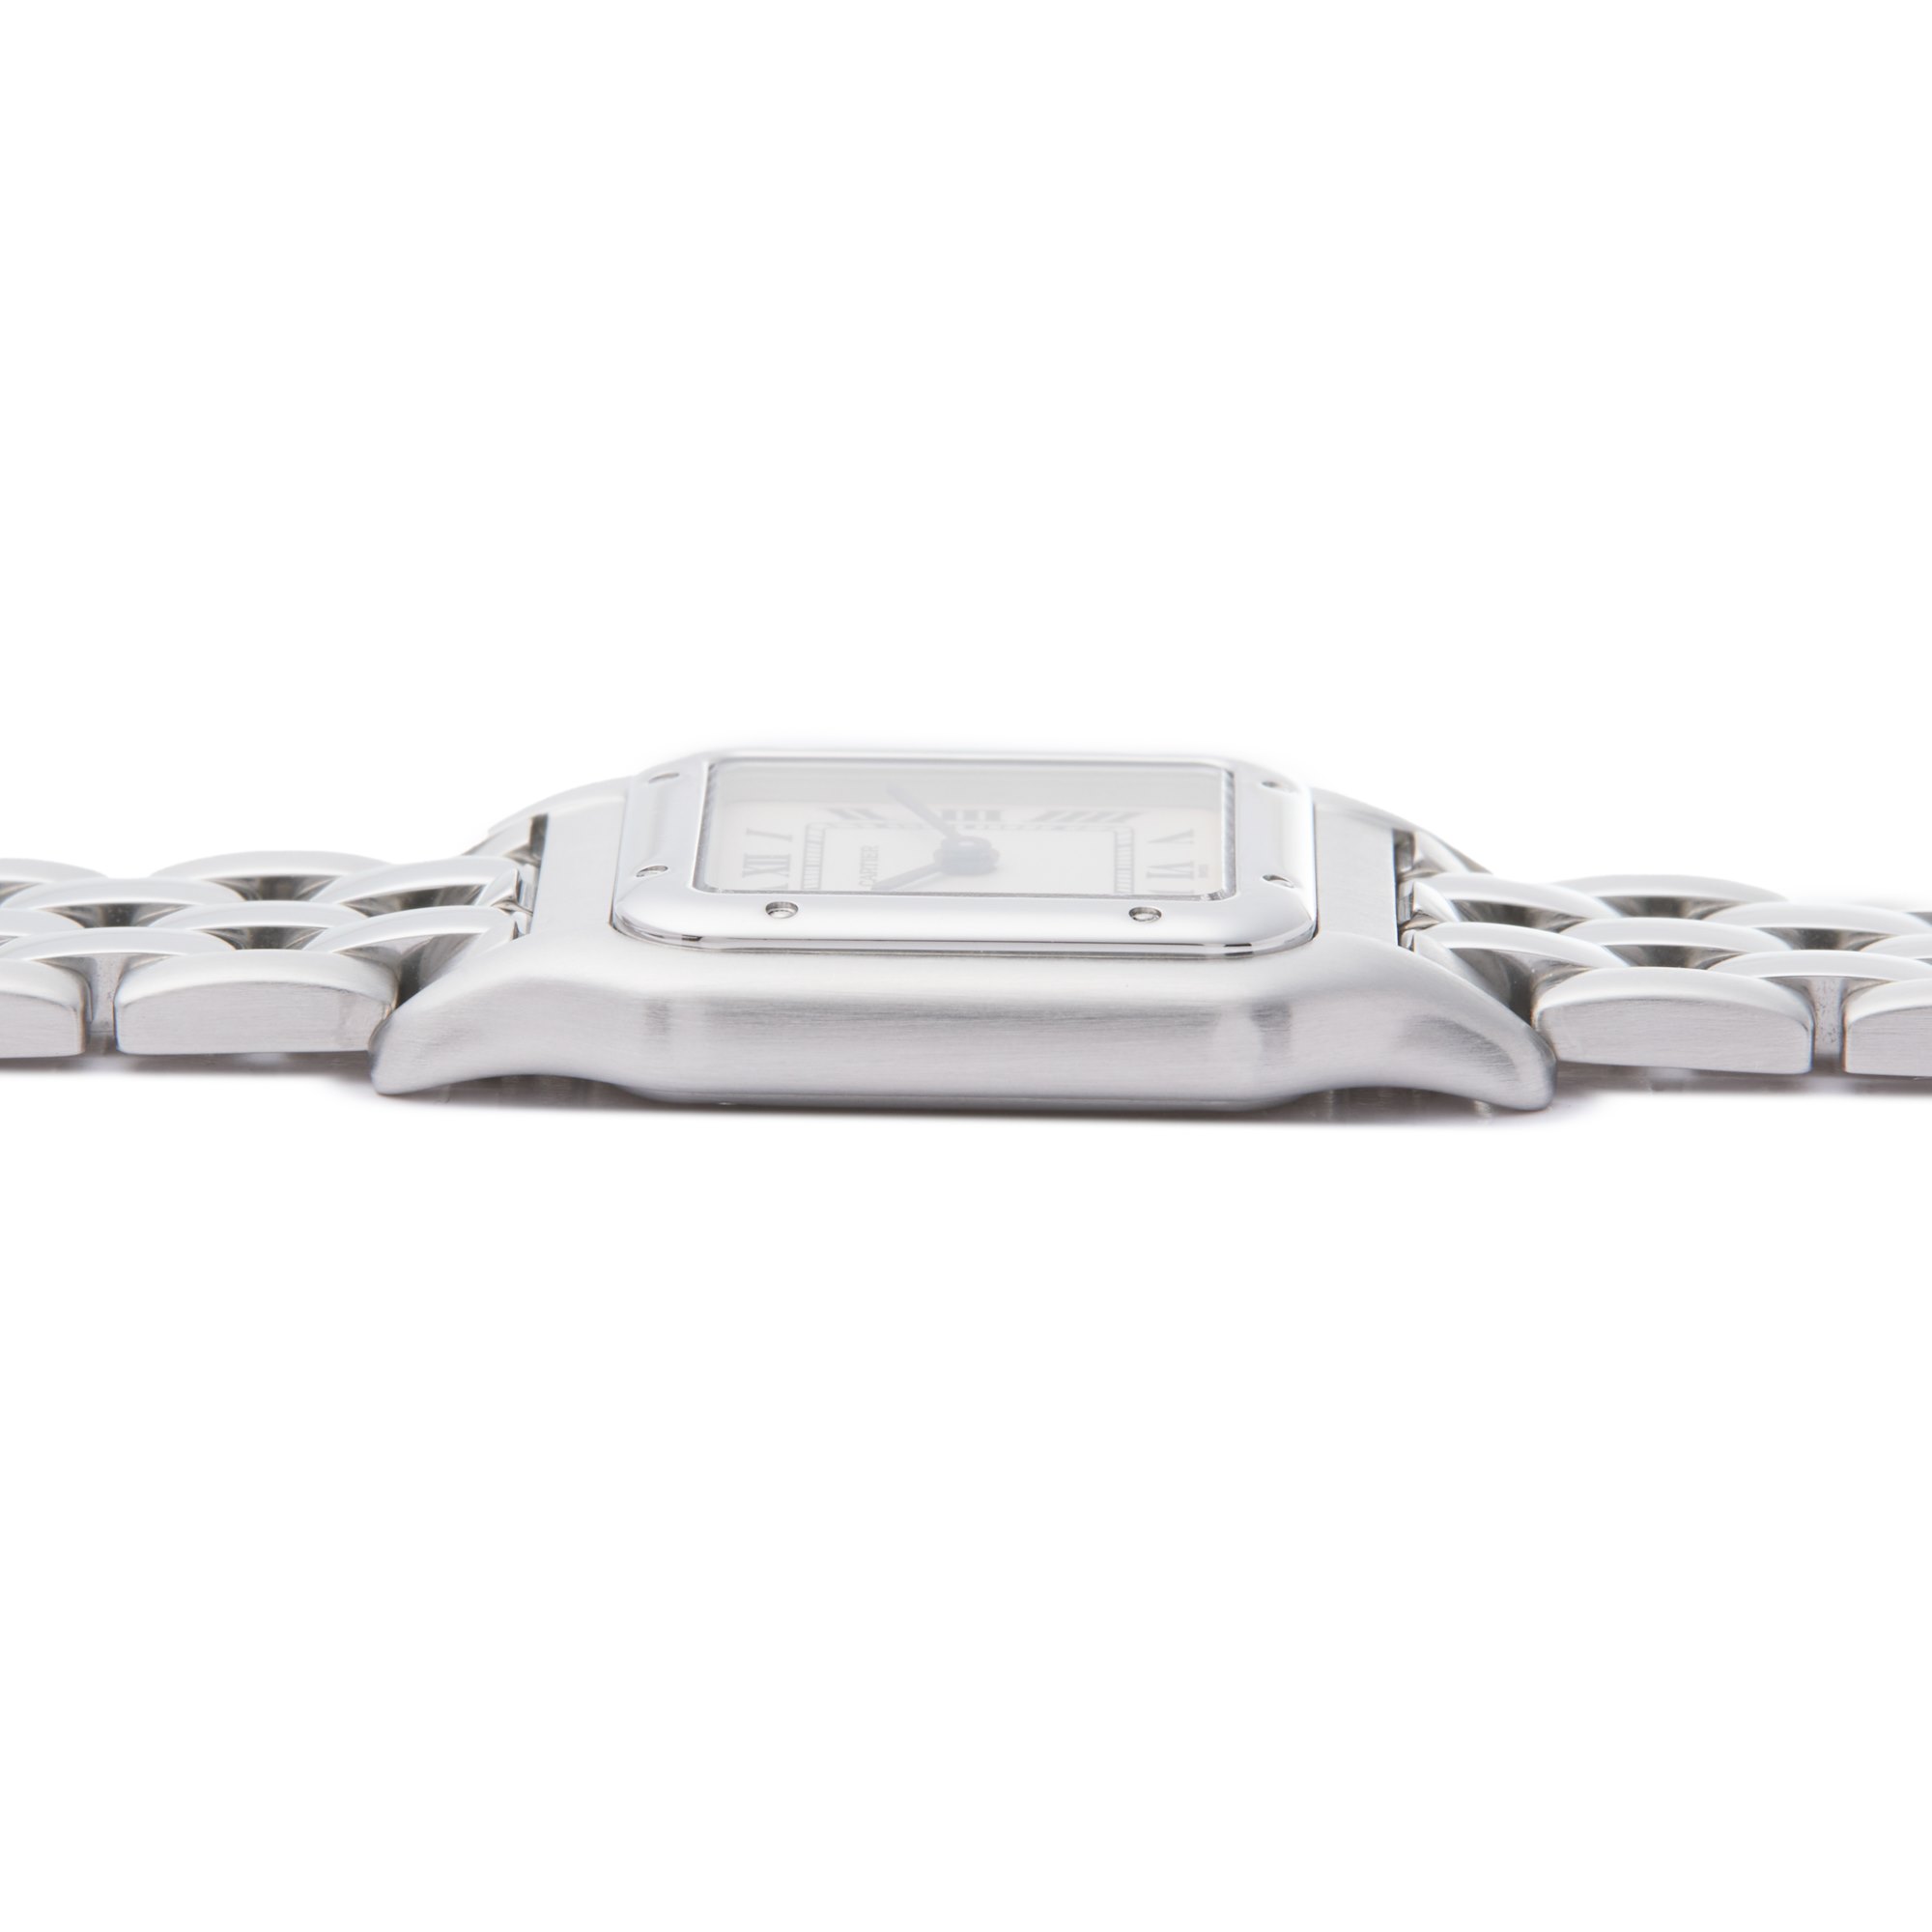 Cartier Panthère Stainless Steel W2503385 or 1320